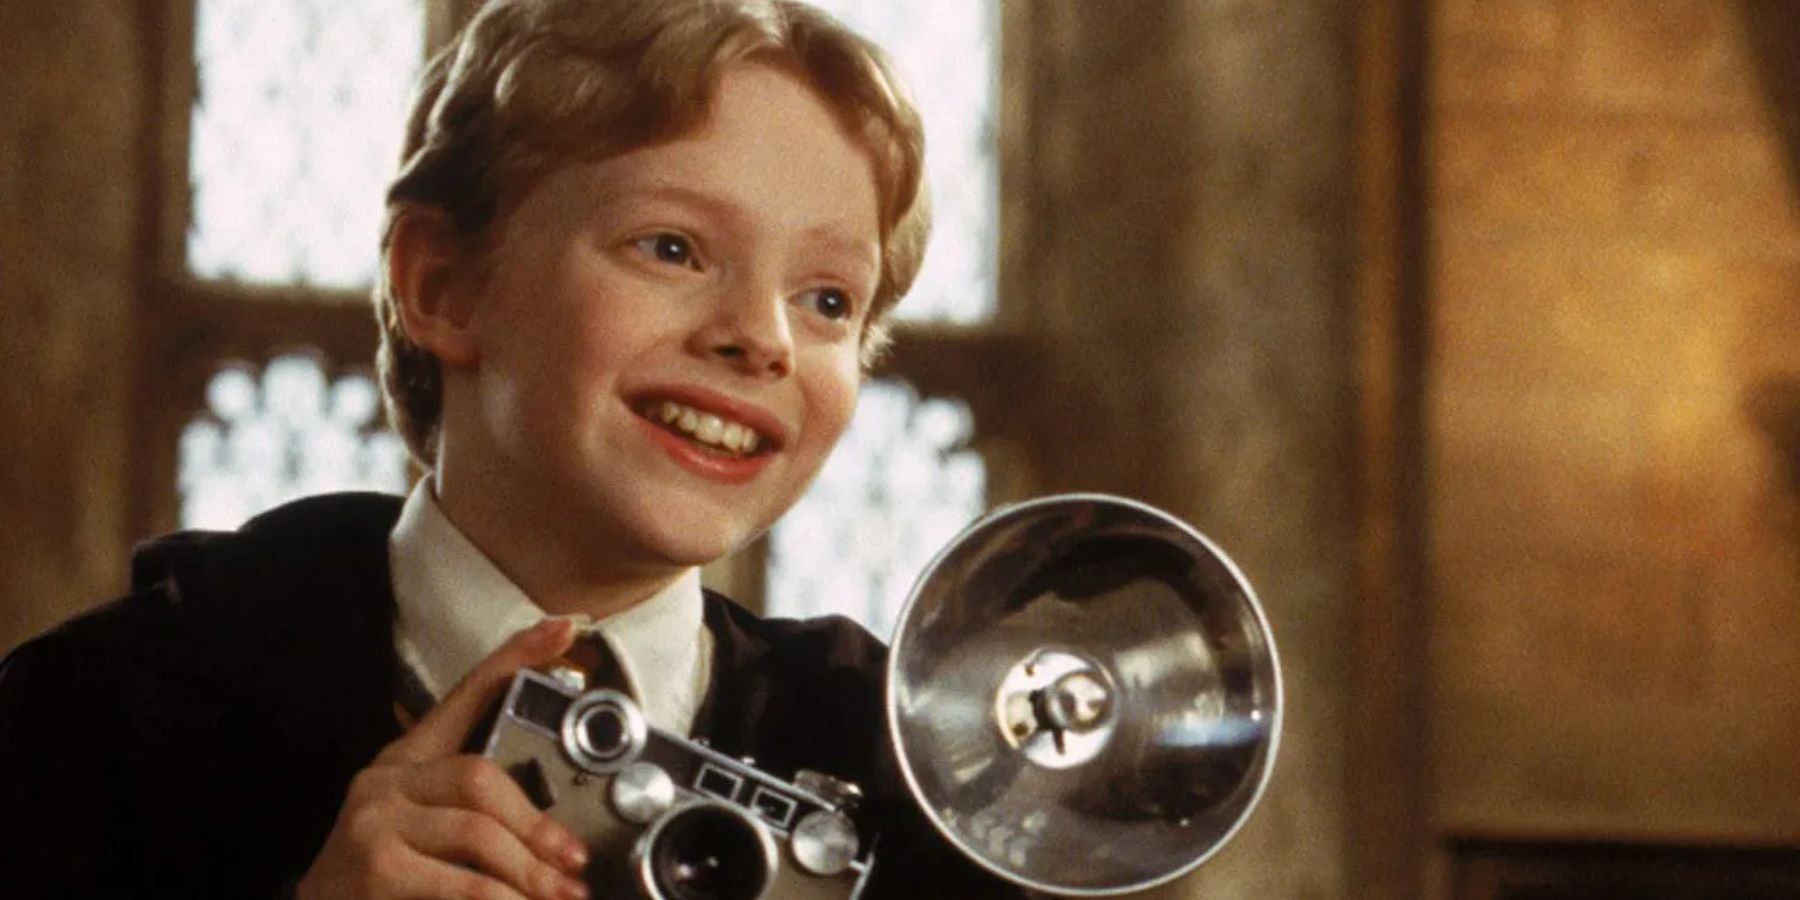 A Still of Colin Creevey from the Harry Potter series